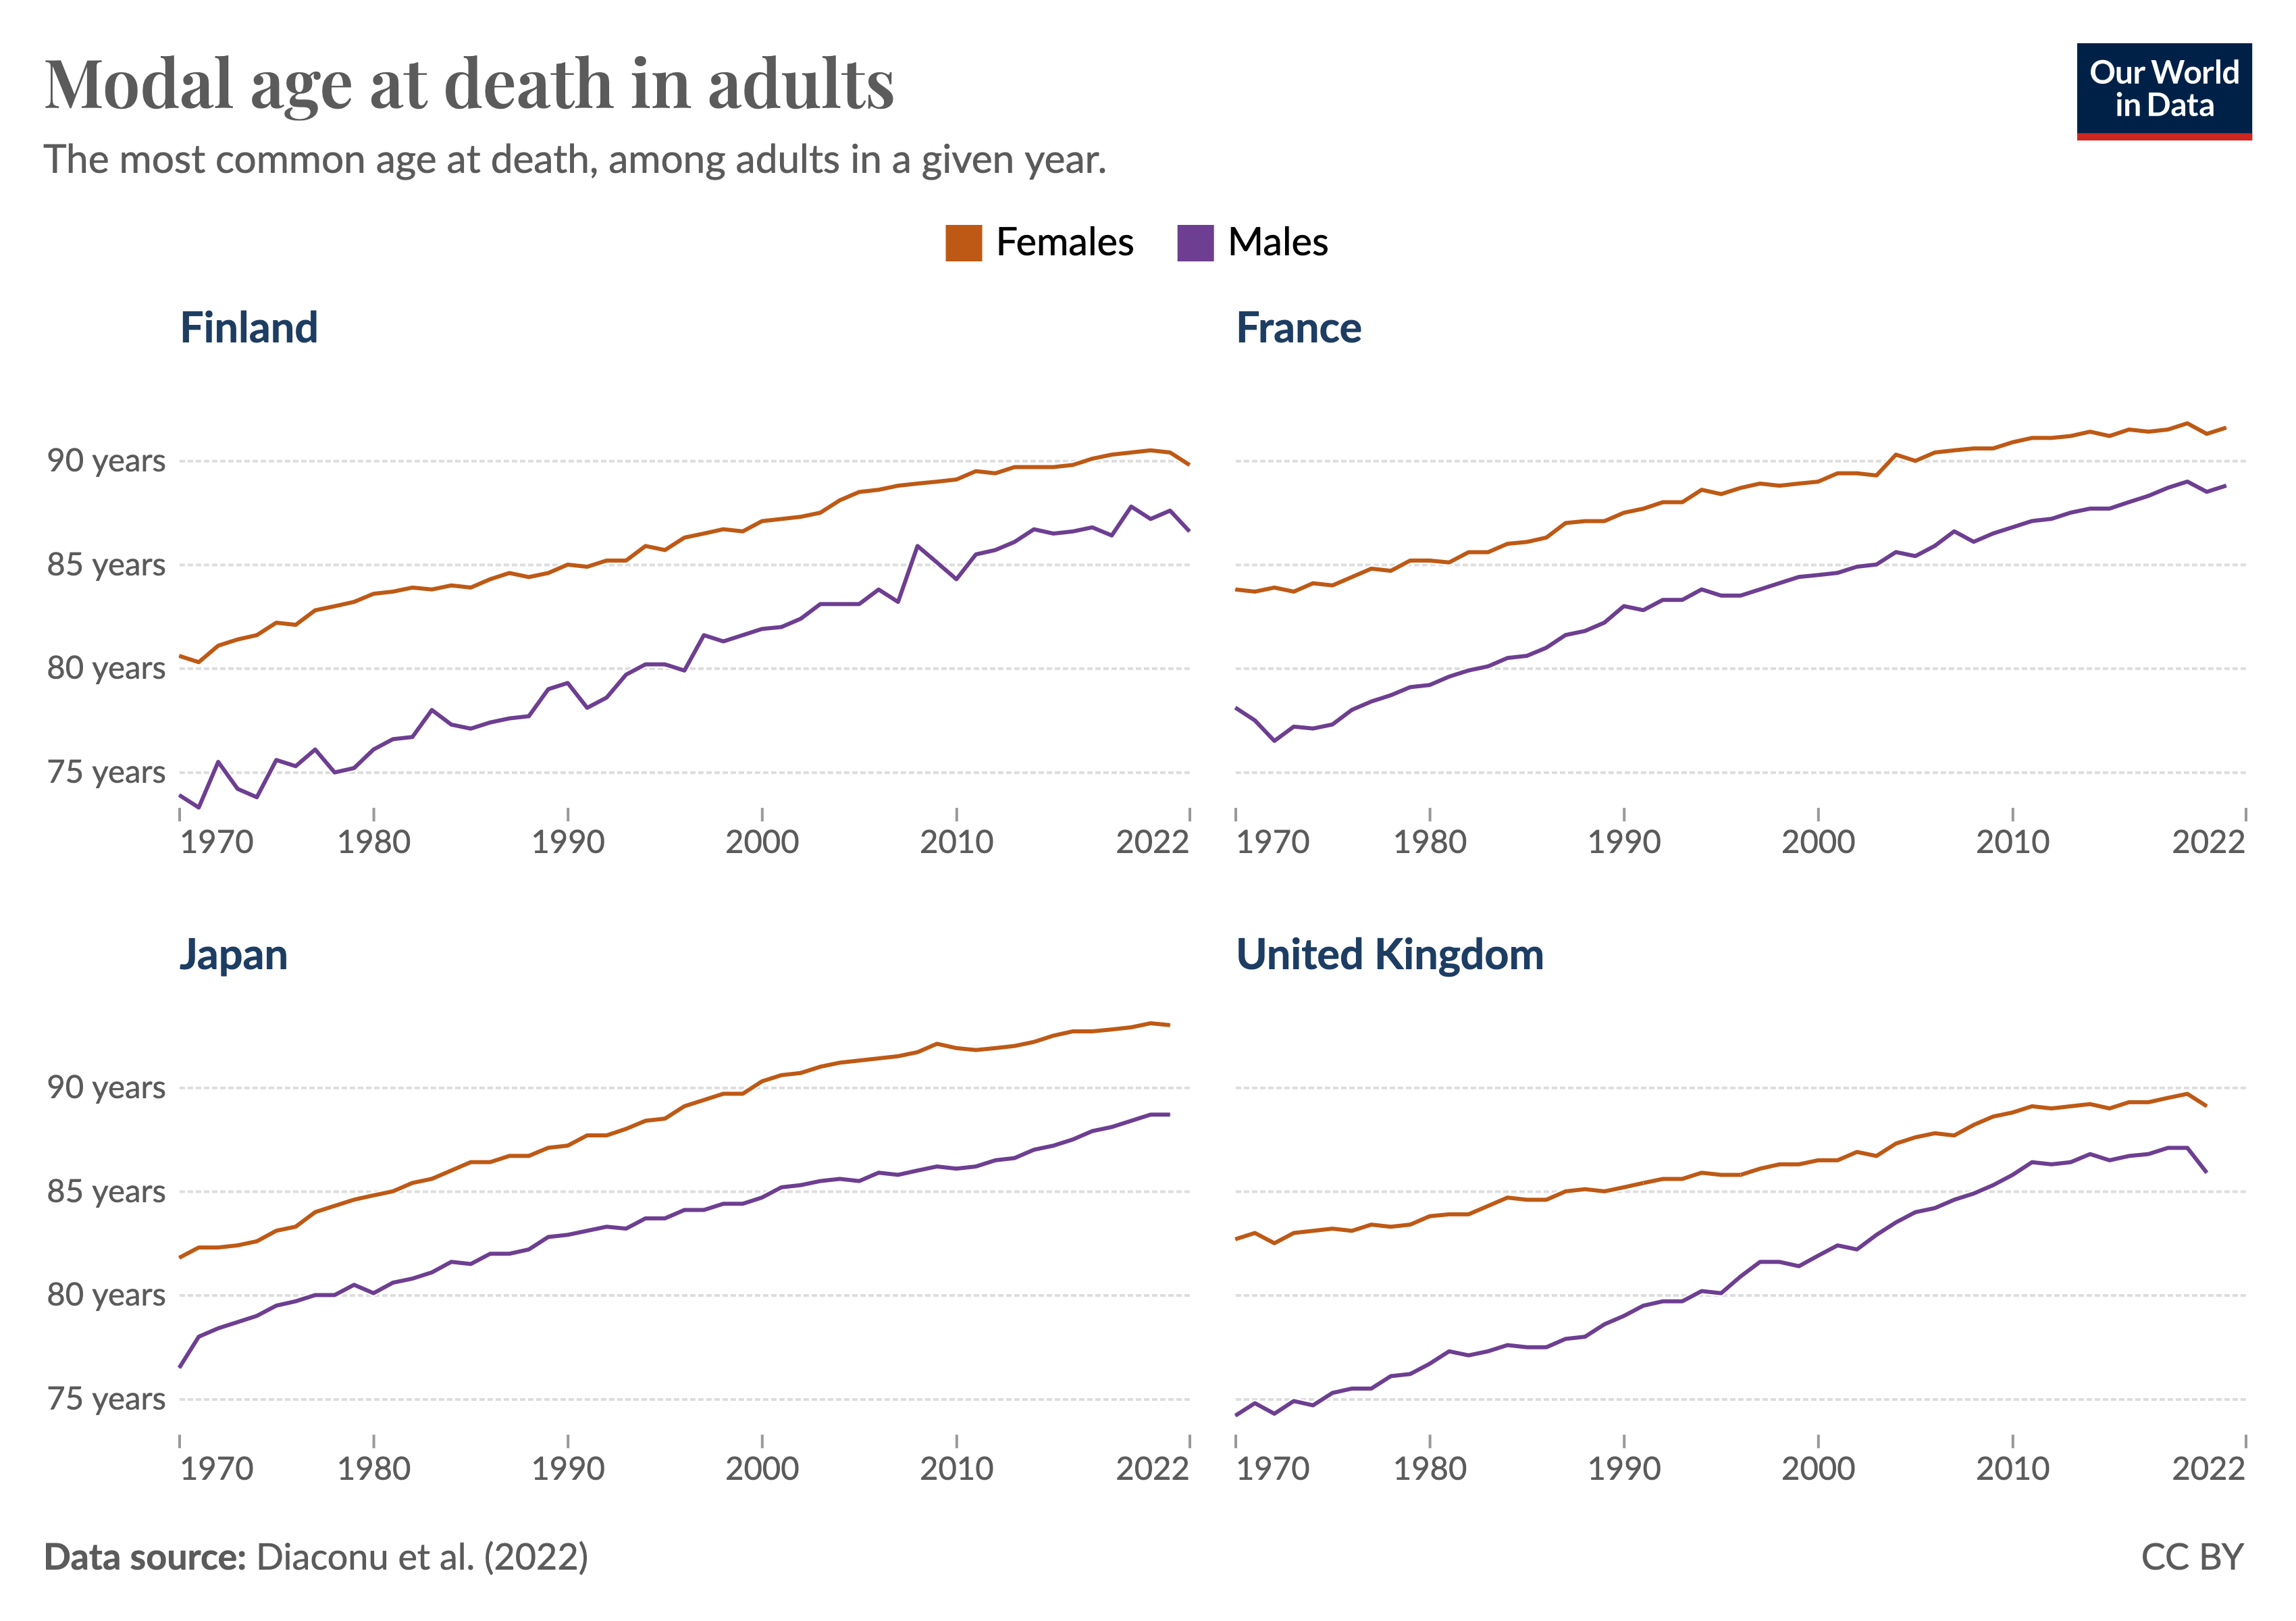 Line chart showing the 'adult modal age at death' in males and females in four countries (France, Finland, Japan and the United Kingdom). The chart shows a rise in the adult modal age at death since the 1970s.